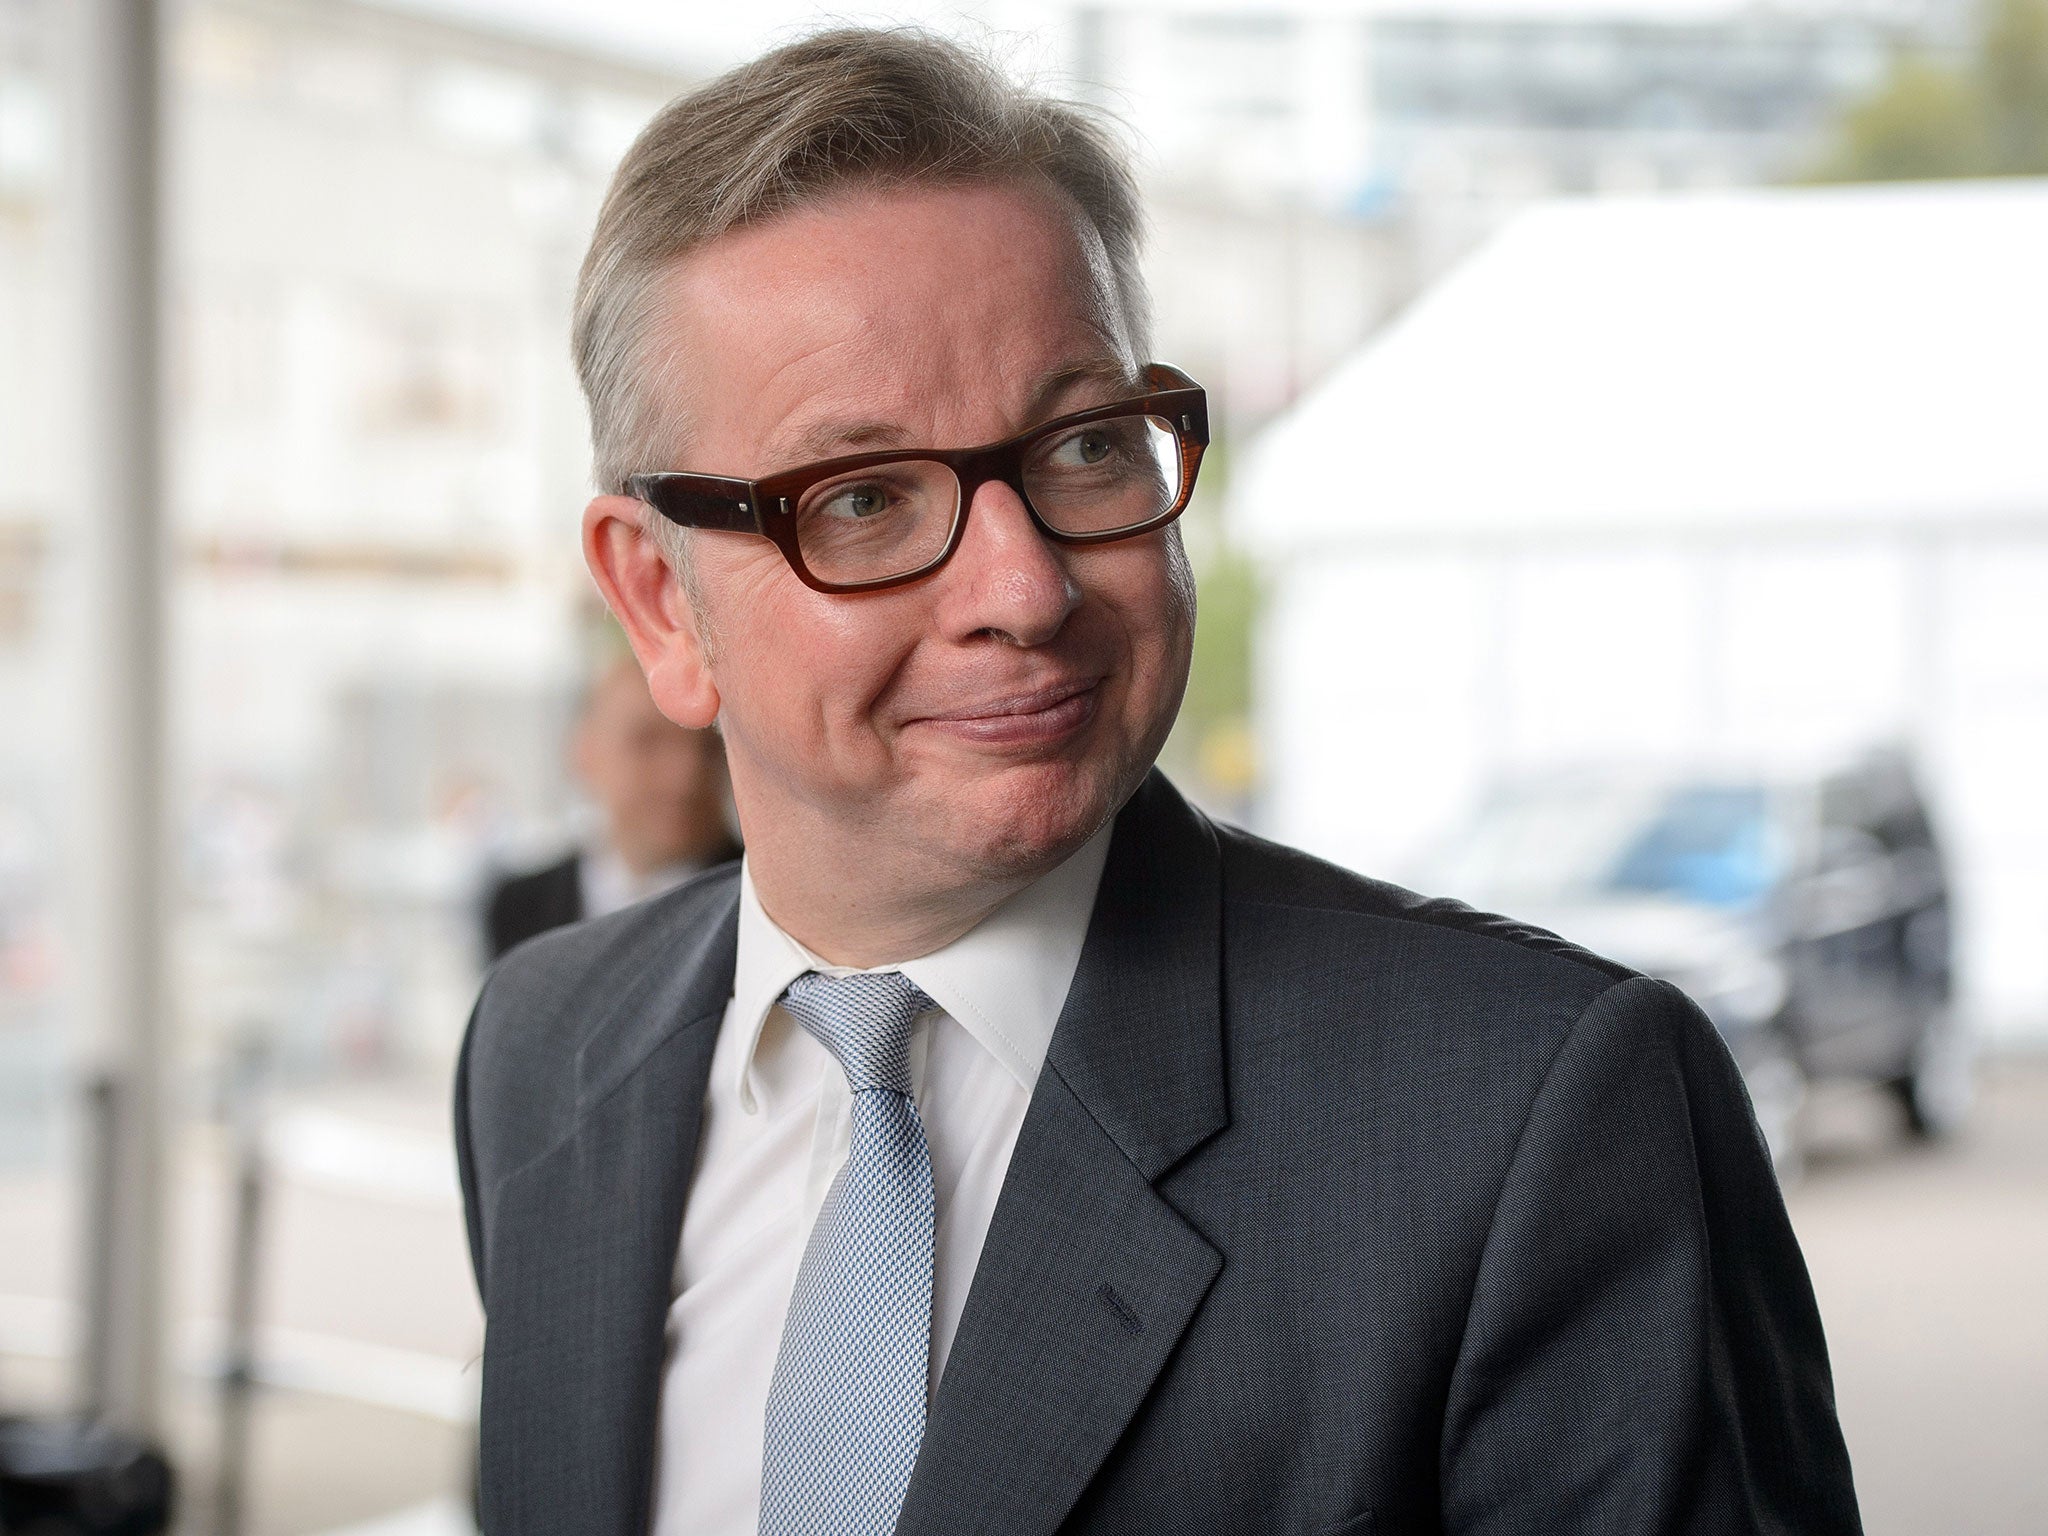 Gove was moved from the Department for Education to come Tory Chief Whip last July